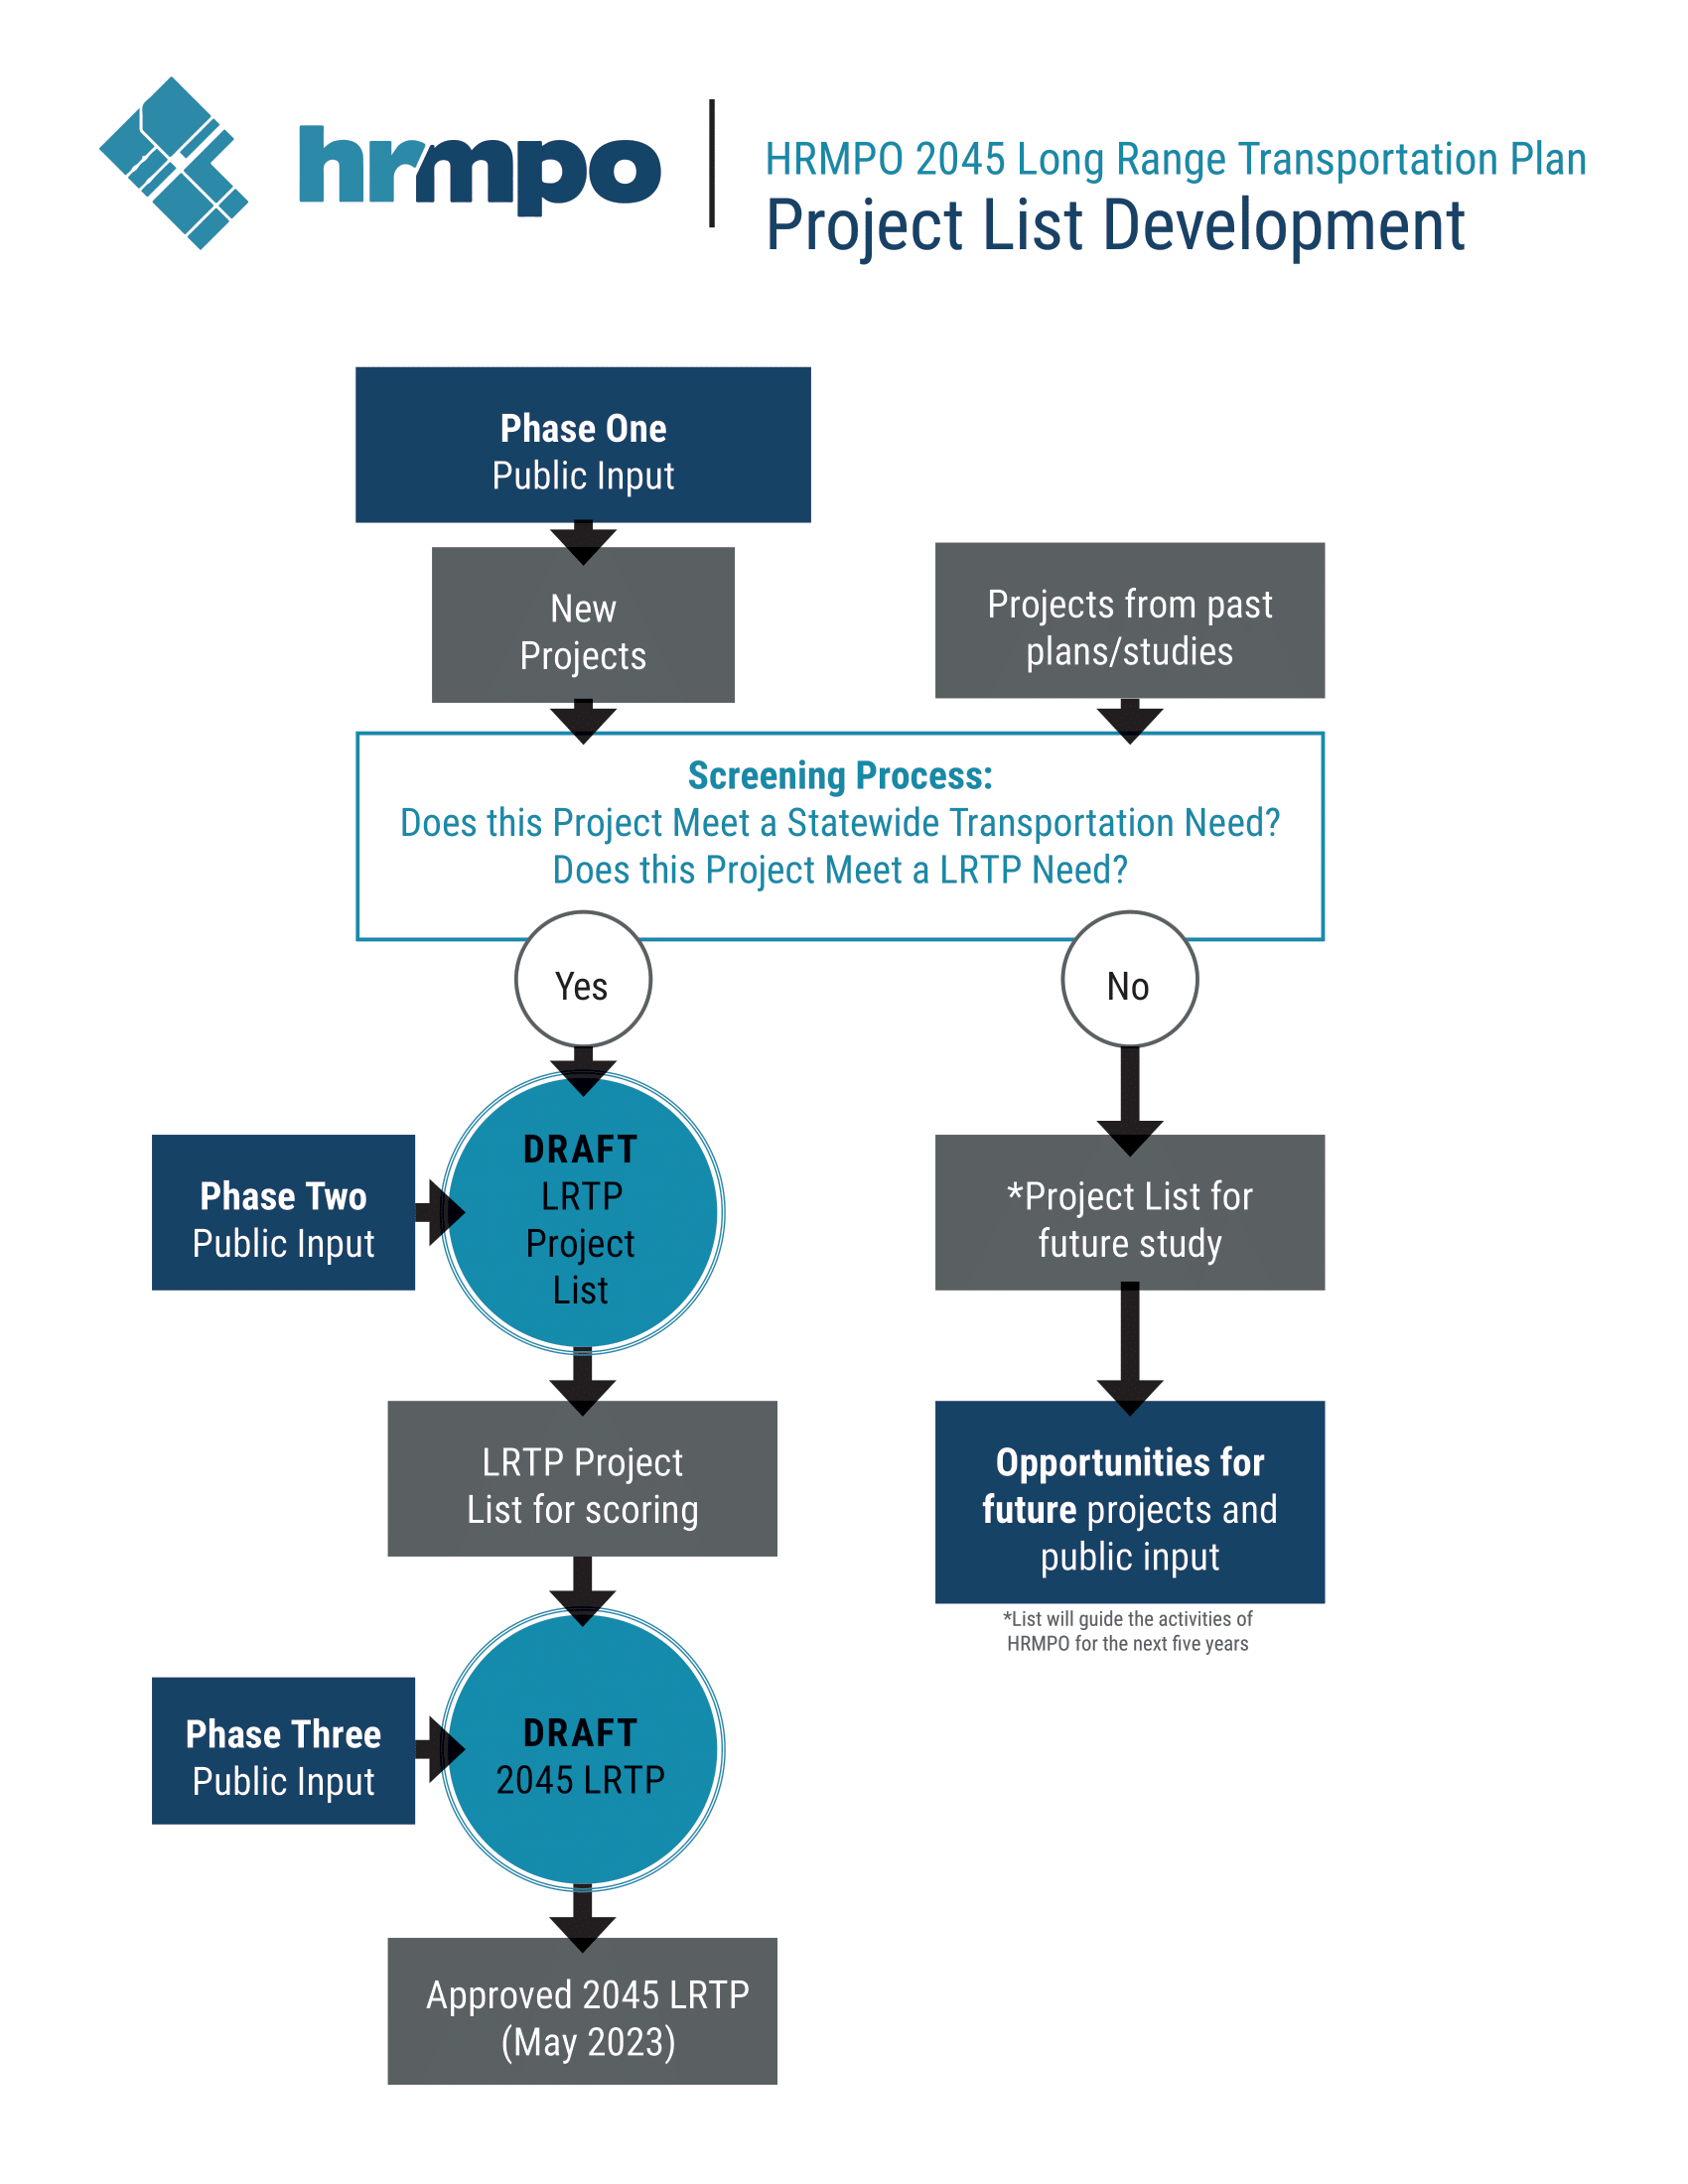 A flowchart of the HRMPO Project List Development. It shows Public input included in each phase of development.